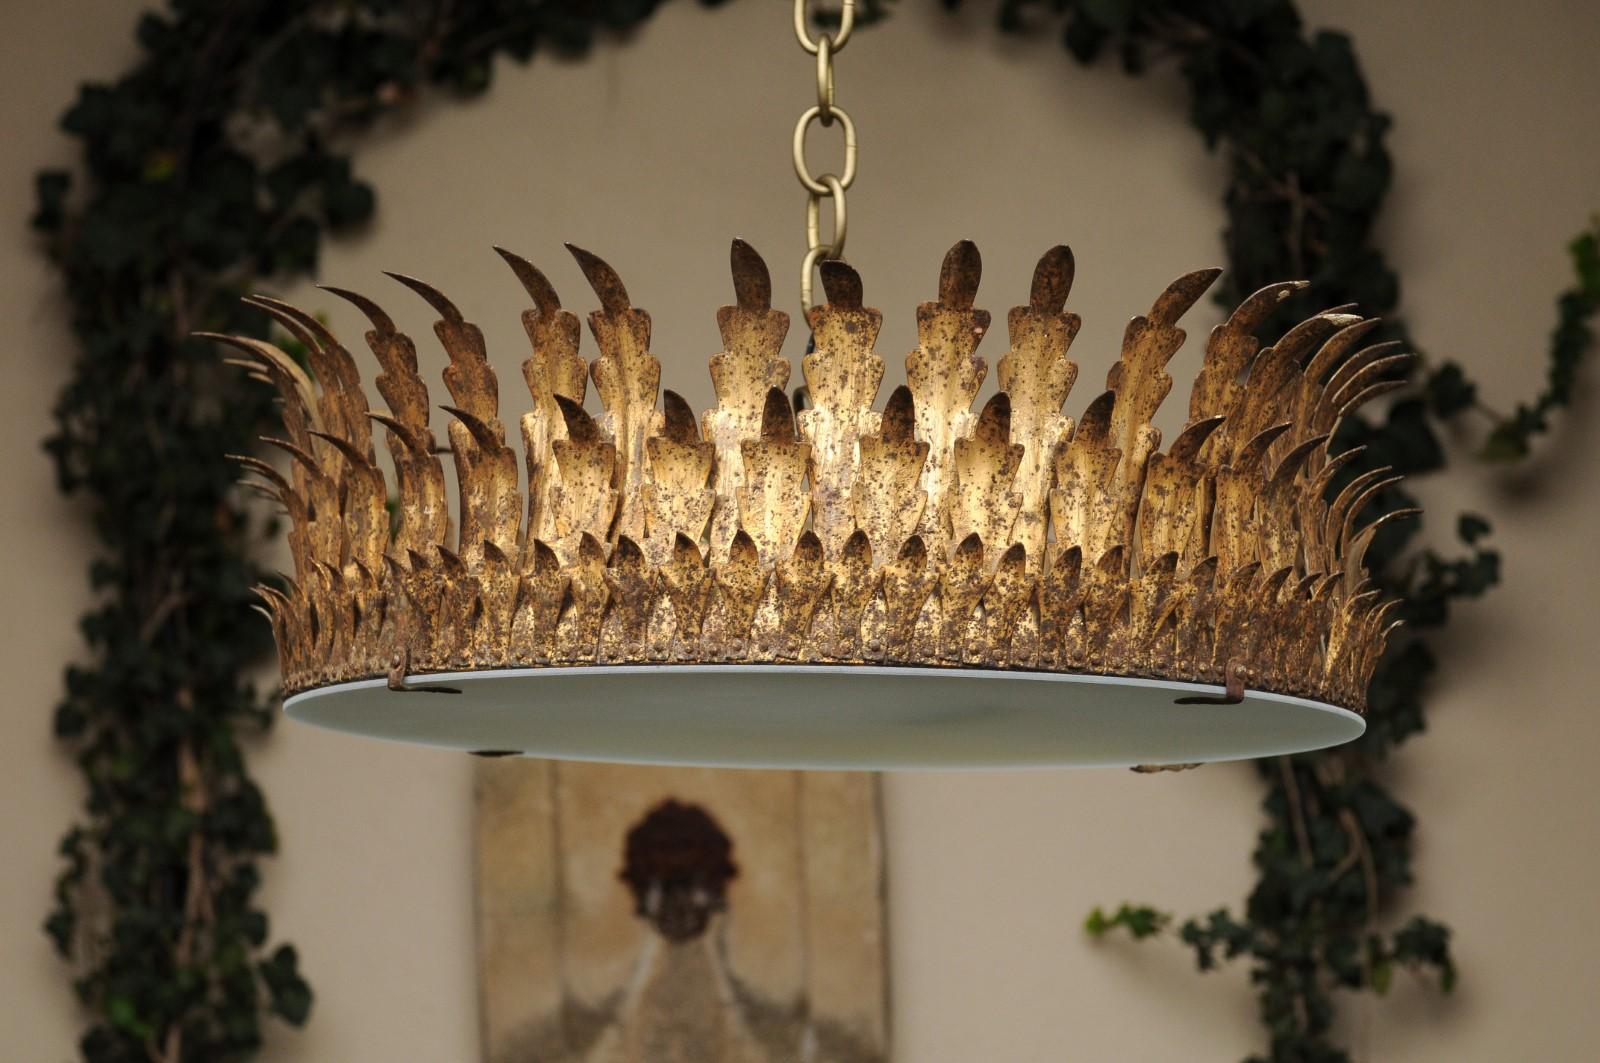 A Spanish vintage gilt metal three-bulb semi-flush crown light fixture from the mid-20th century, with frosted glass and new wiring. Born during the second quarter of the 20th century, this Spanish crown chandelier features an exquisite décor of